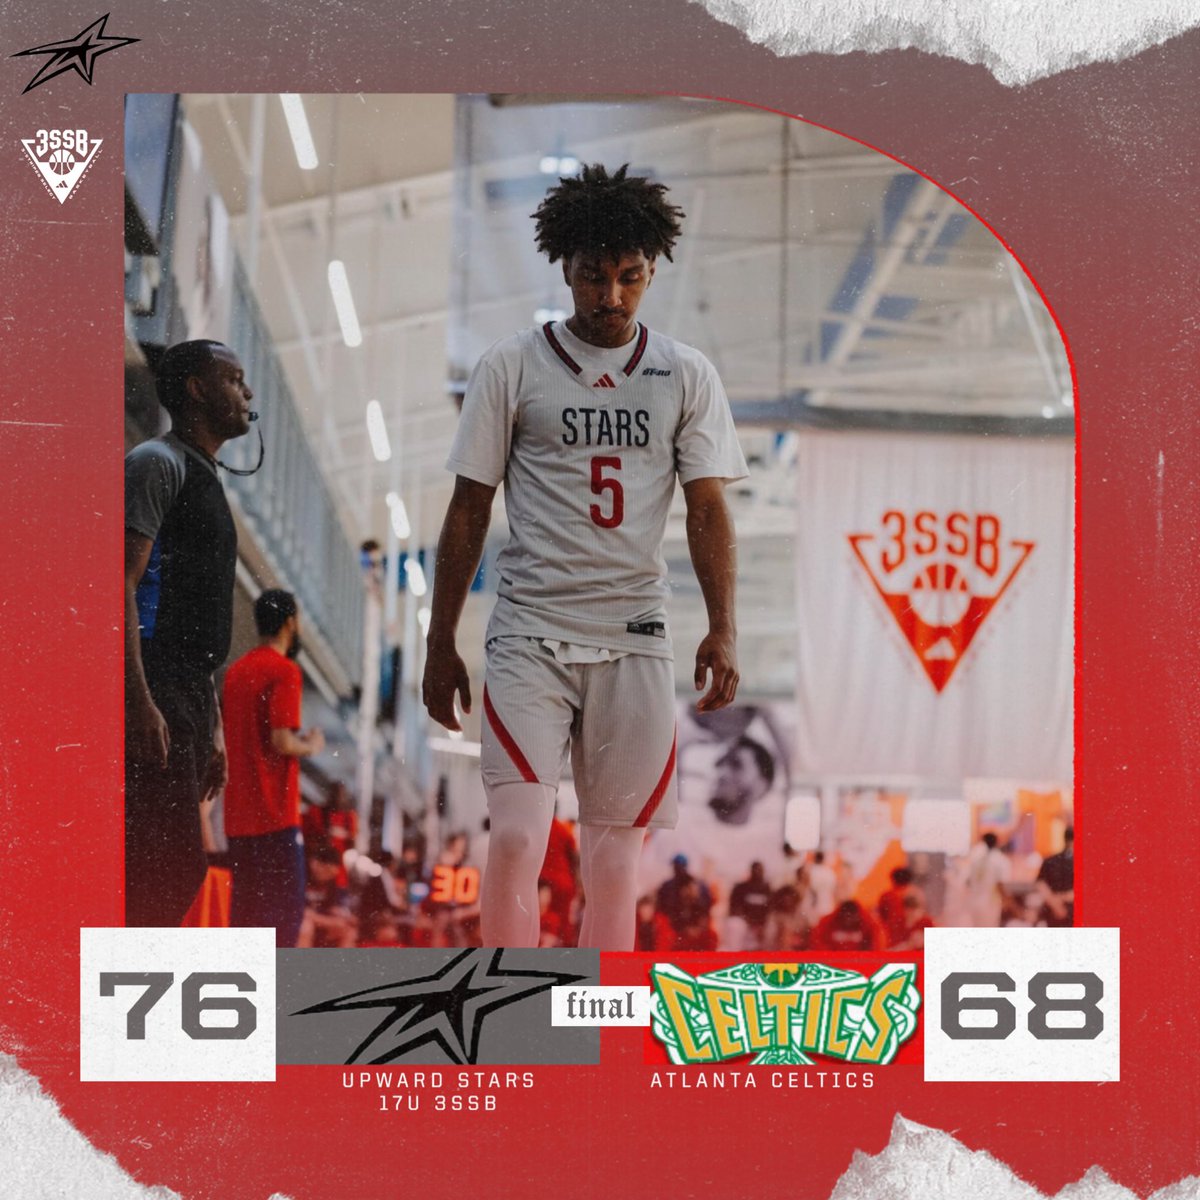 Ended Session II with a W ✨↗️ @jordanbeen4pf: 19 pts, 3 reb, 3 ast, 2 stl @Treetop_06: 12 pts, 5 reb, 3 ast @JonahLawrence_: 11 pts, 5 reb, 2 ast, 2 stl @CJEgametime: 12 pts, 4 reb, 2 stl, 2 blk